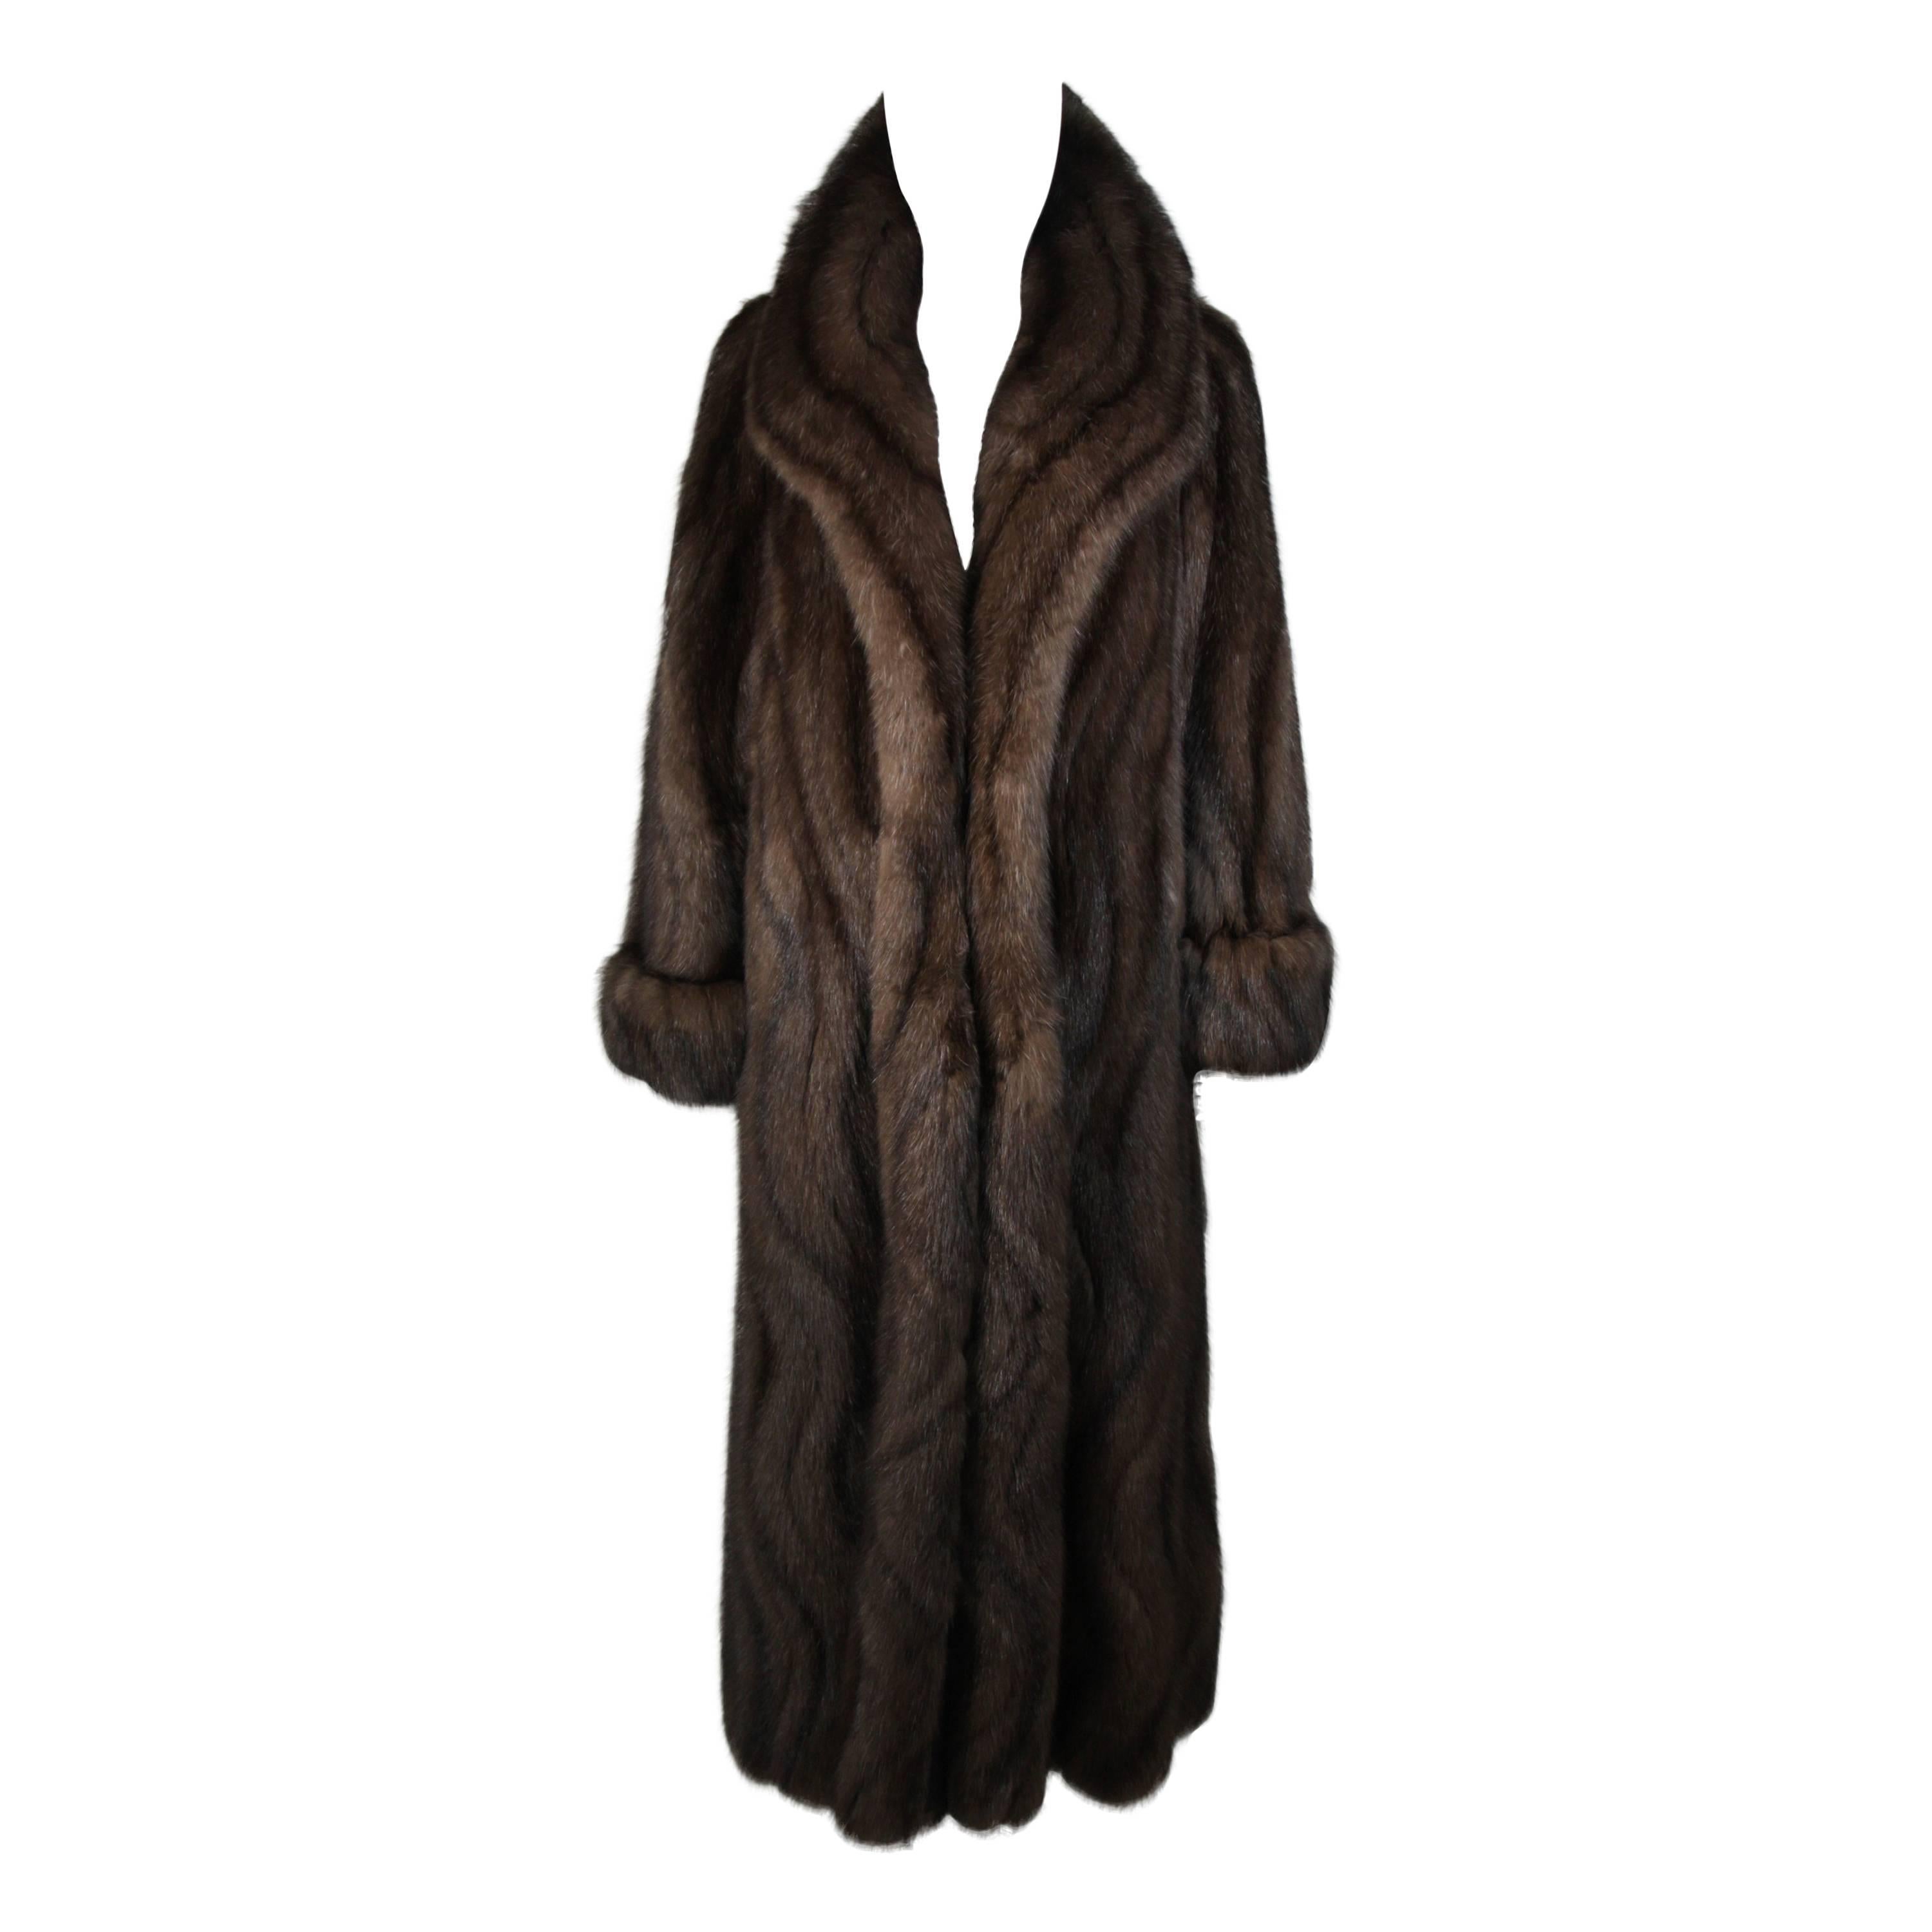 Russian Sable Coat with Wave Pattern Excellent Condition Retail $300, 000.00